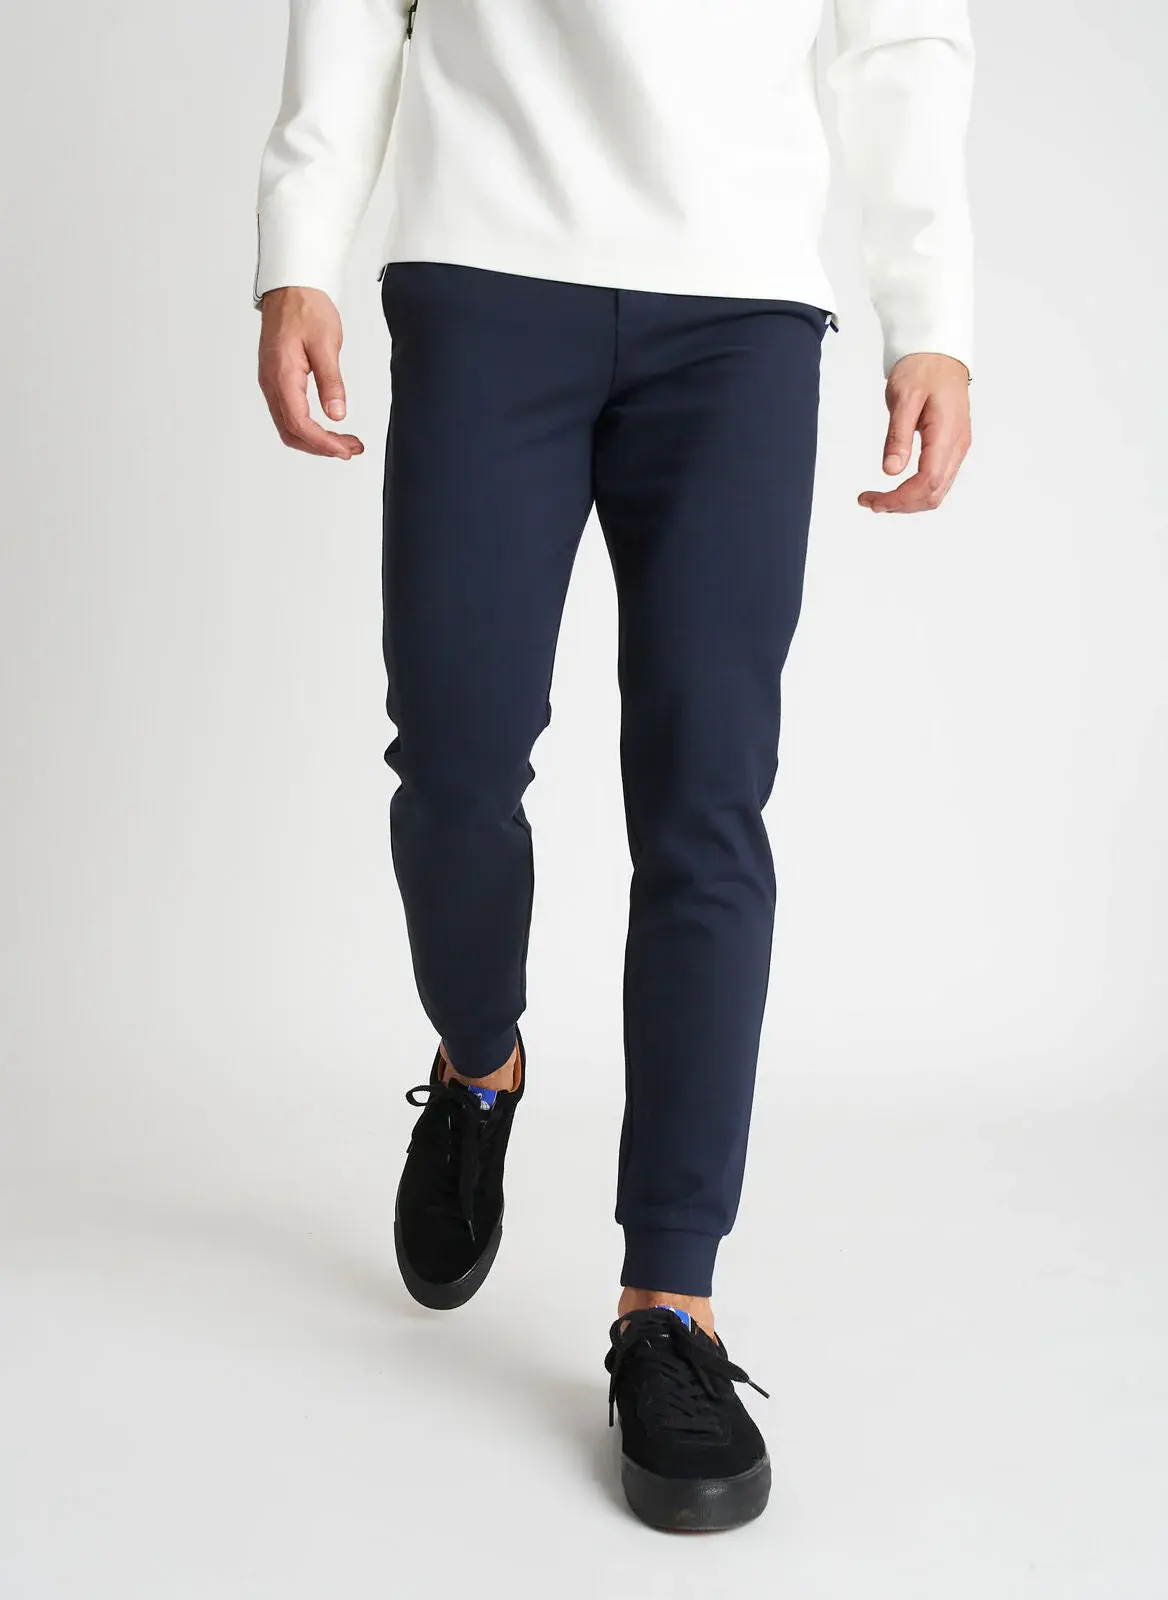 Kit And Ace Double Knit On Time Joggers. 1